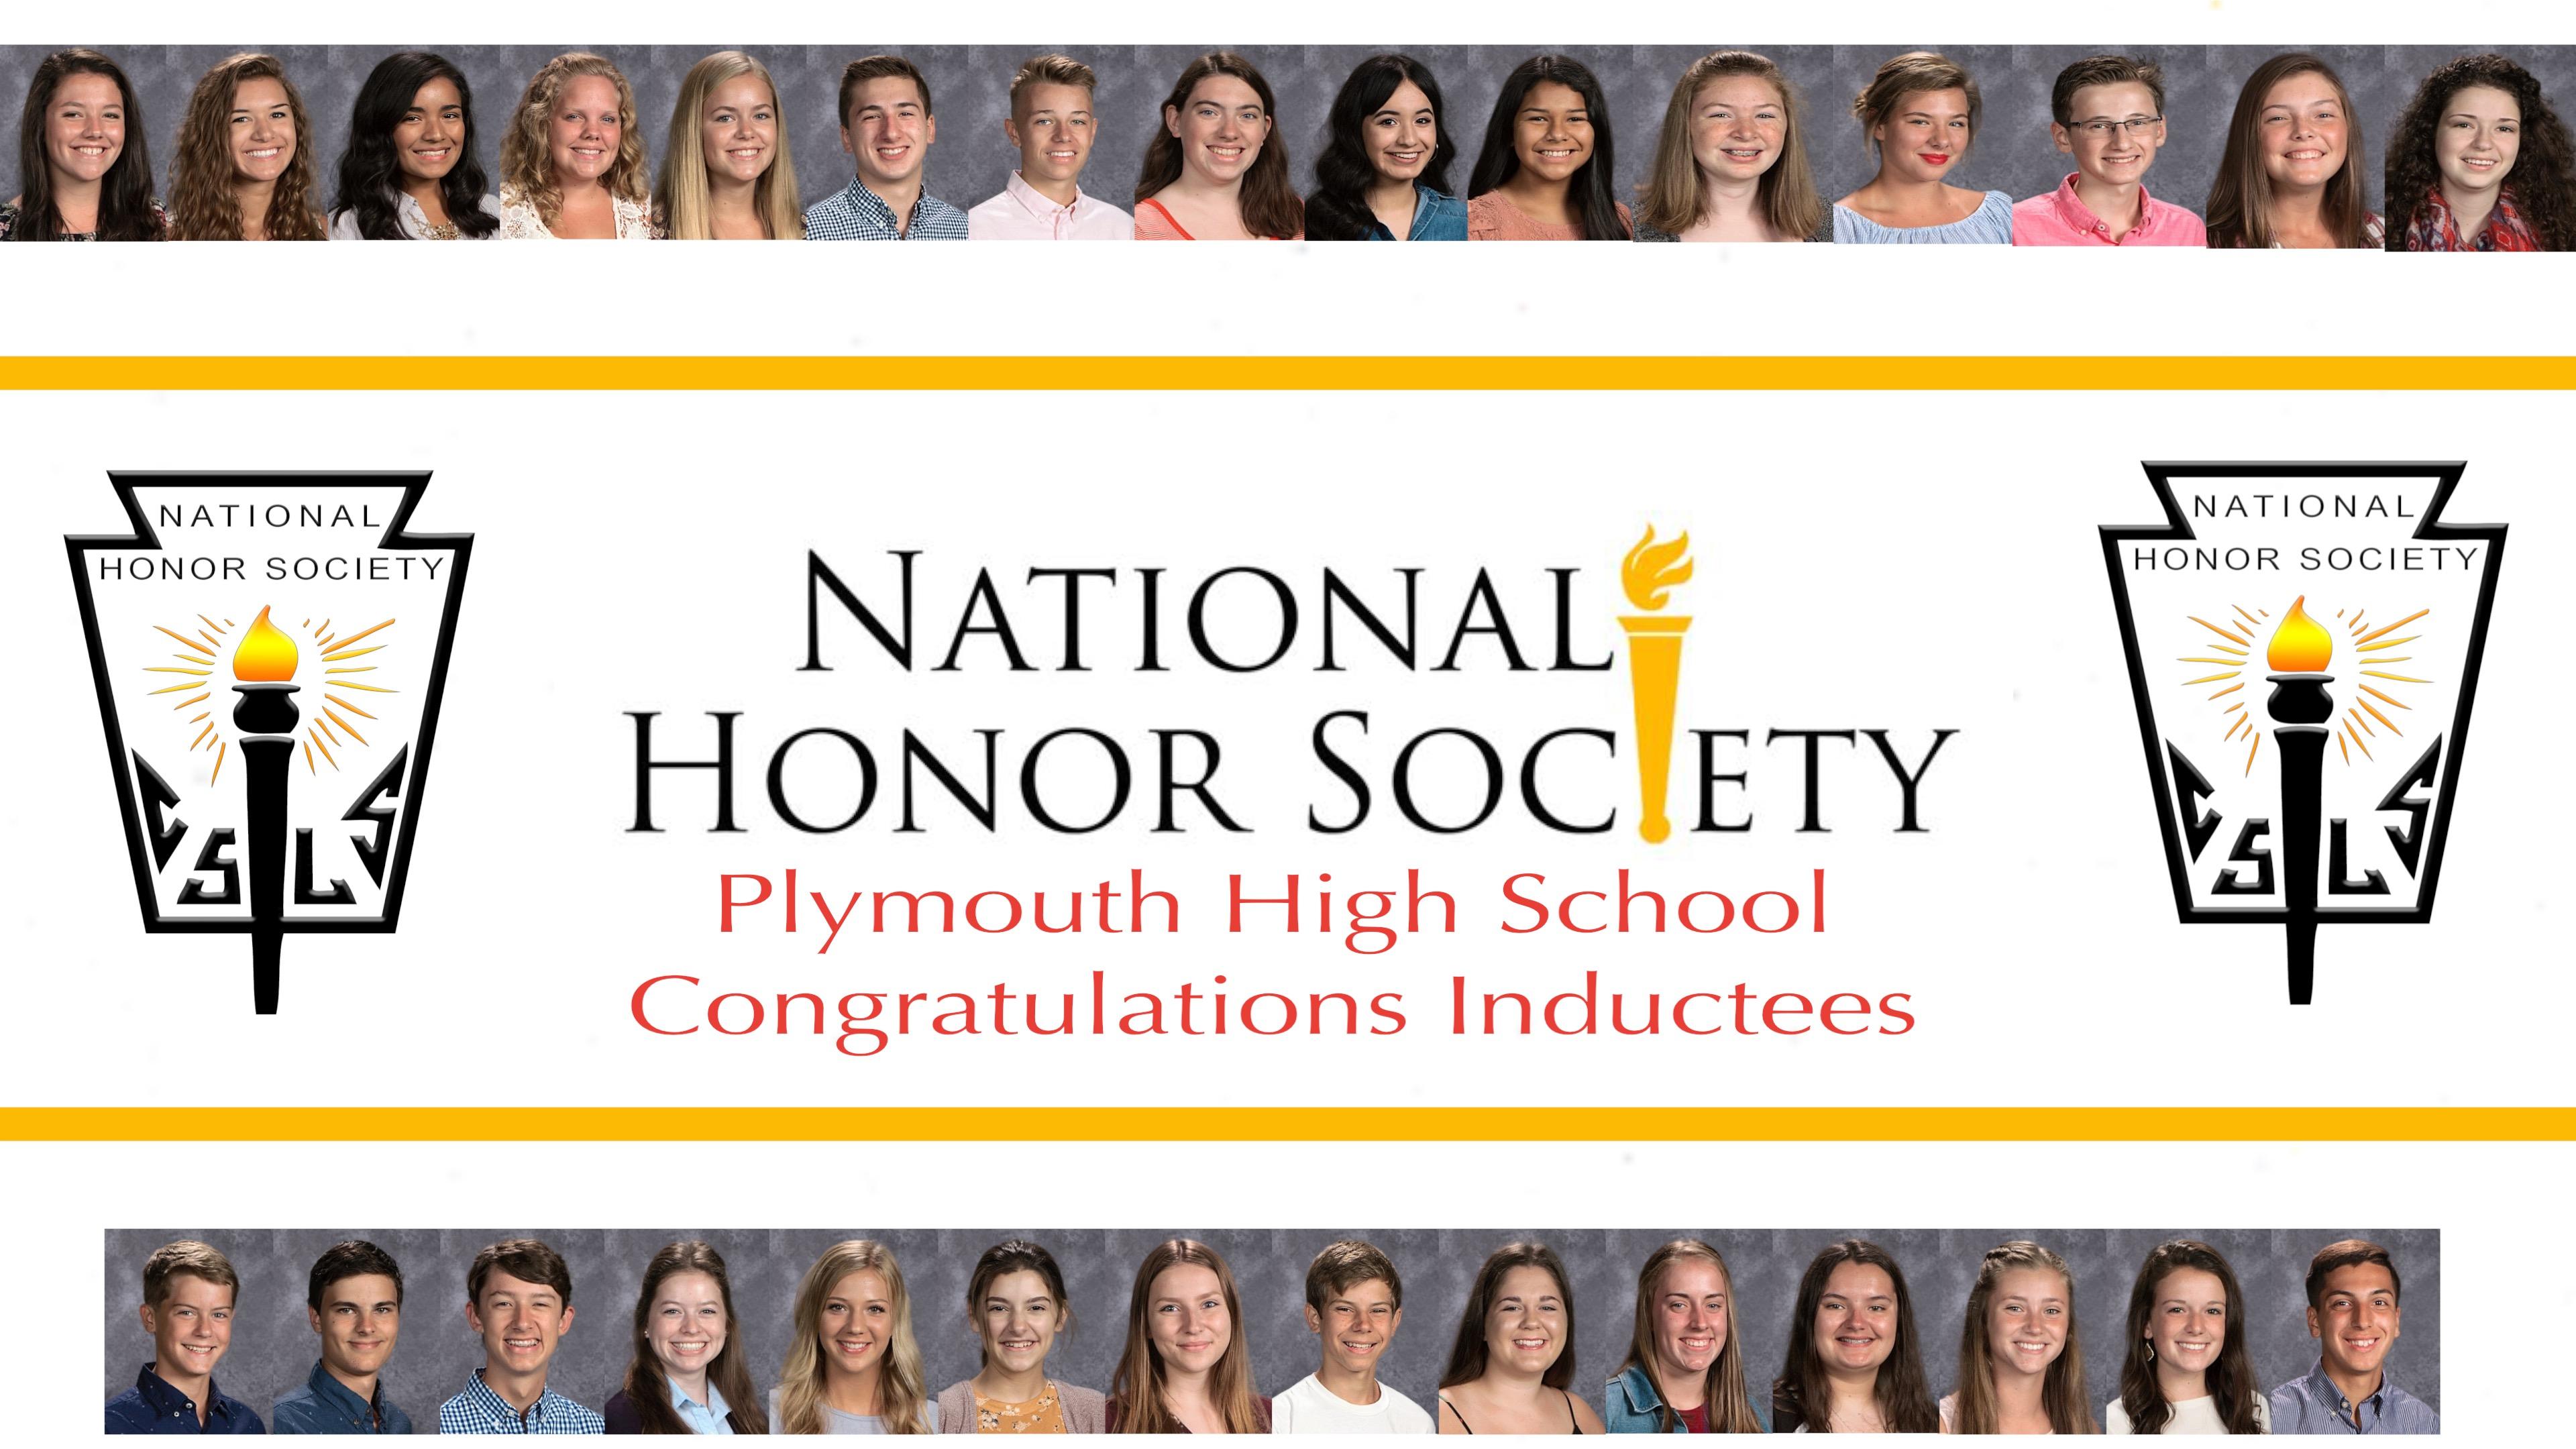 National Honor Society Plymouth High School Congratulations Inductees- National Honor Society Logos and PHS Students